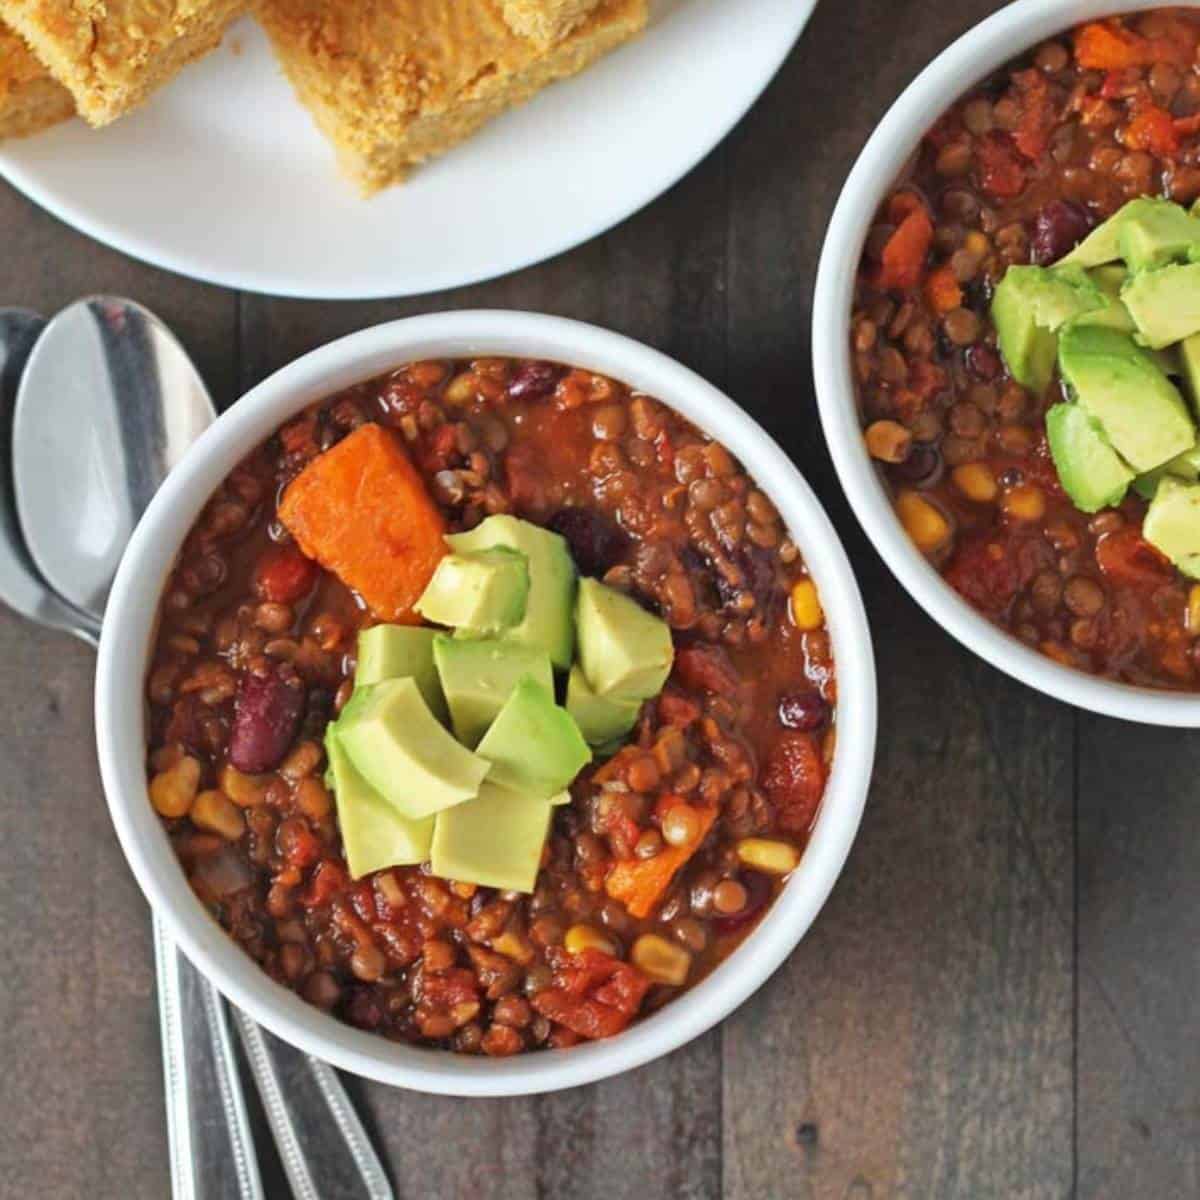 two bowls of chili.